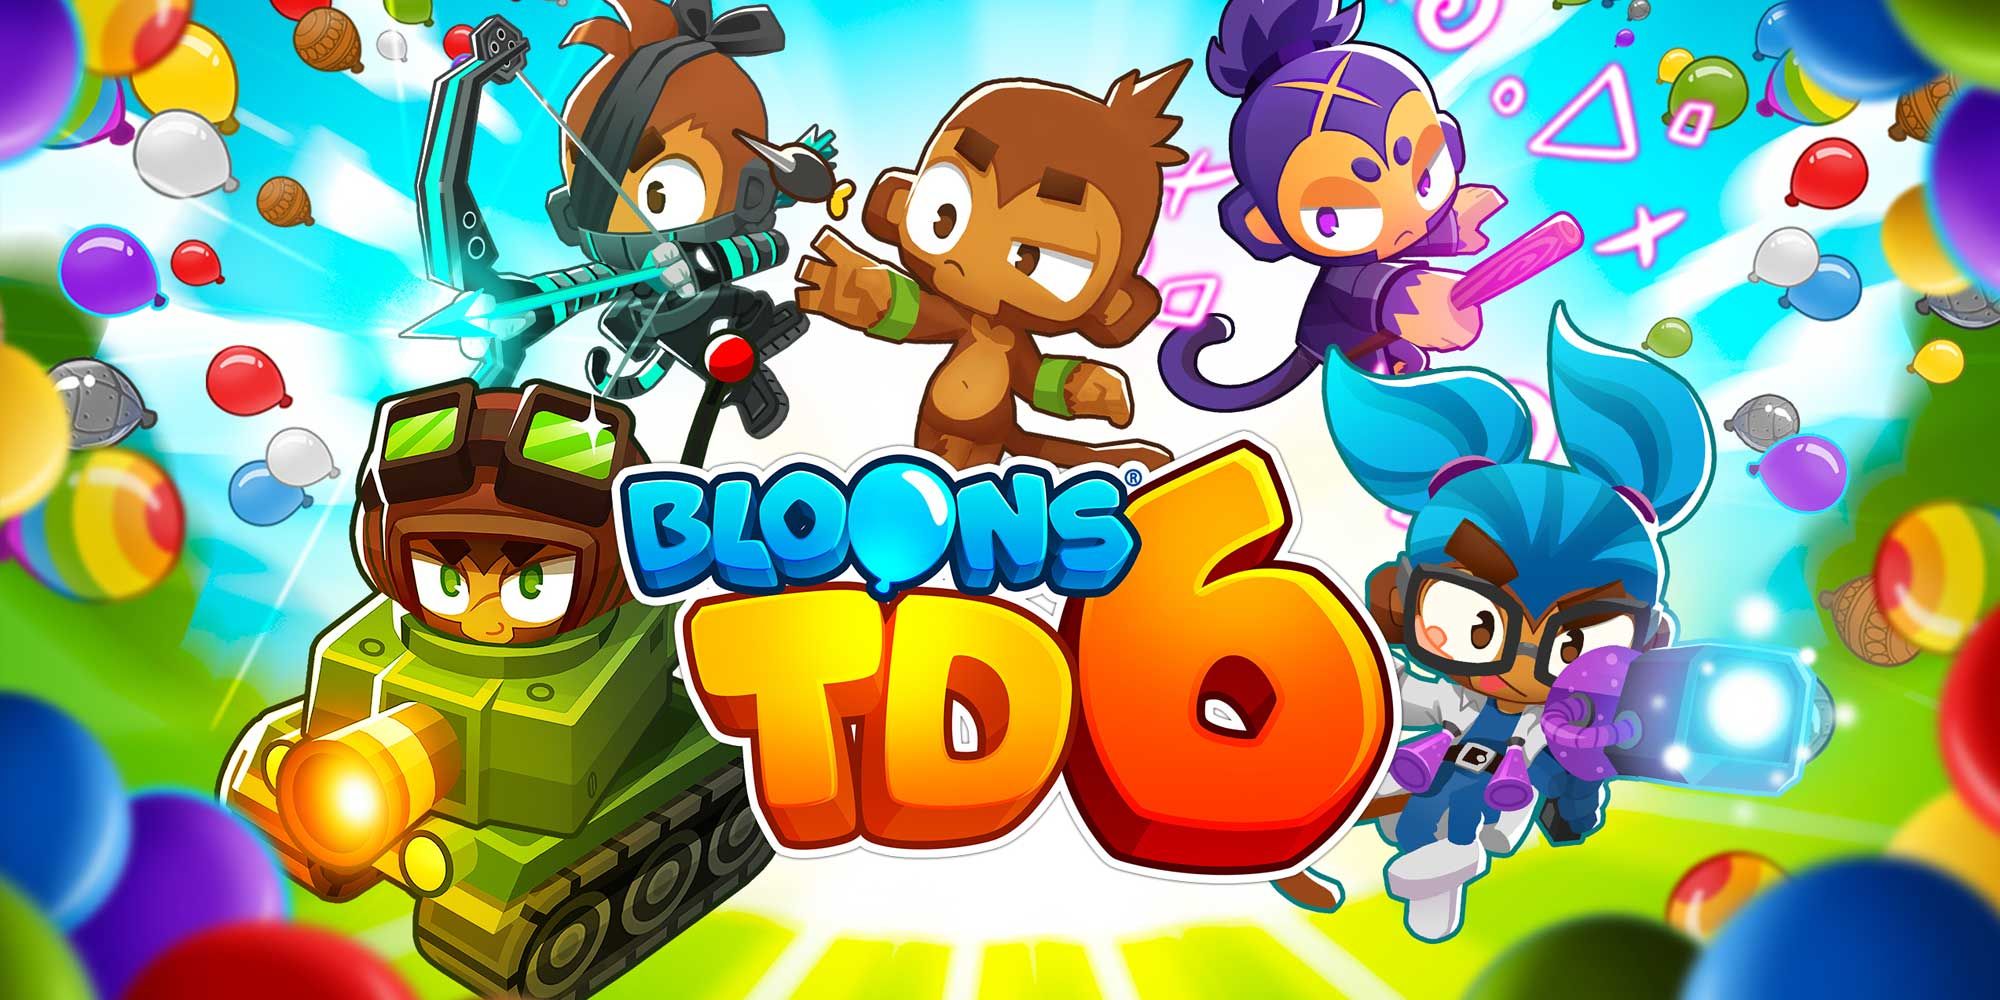 bloons tower defense 5 unblocked games